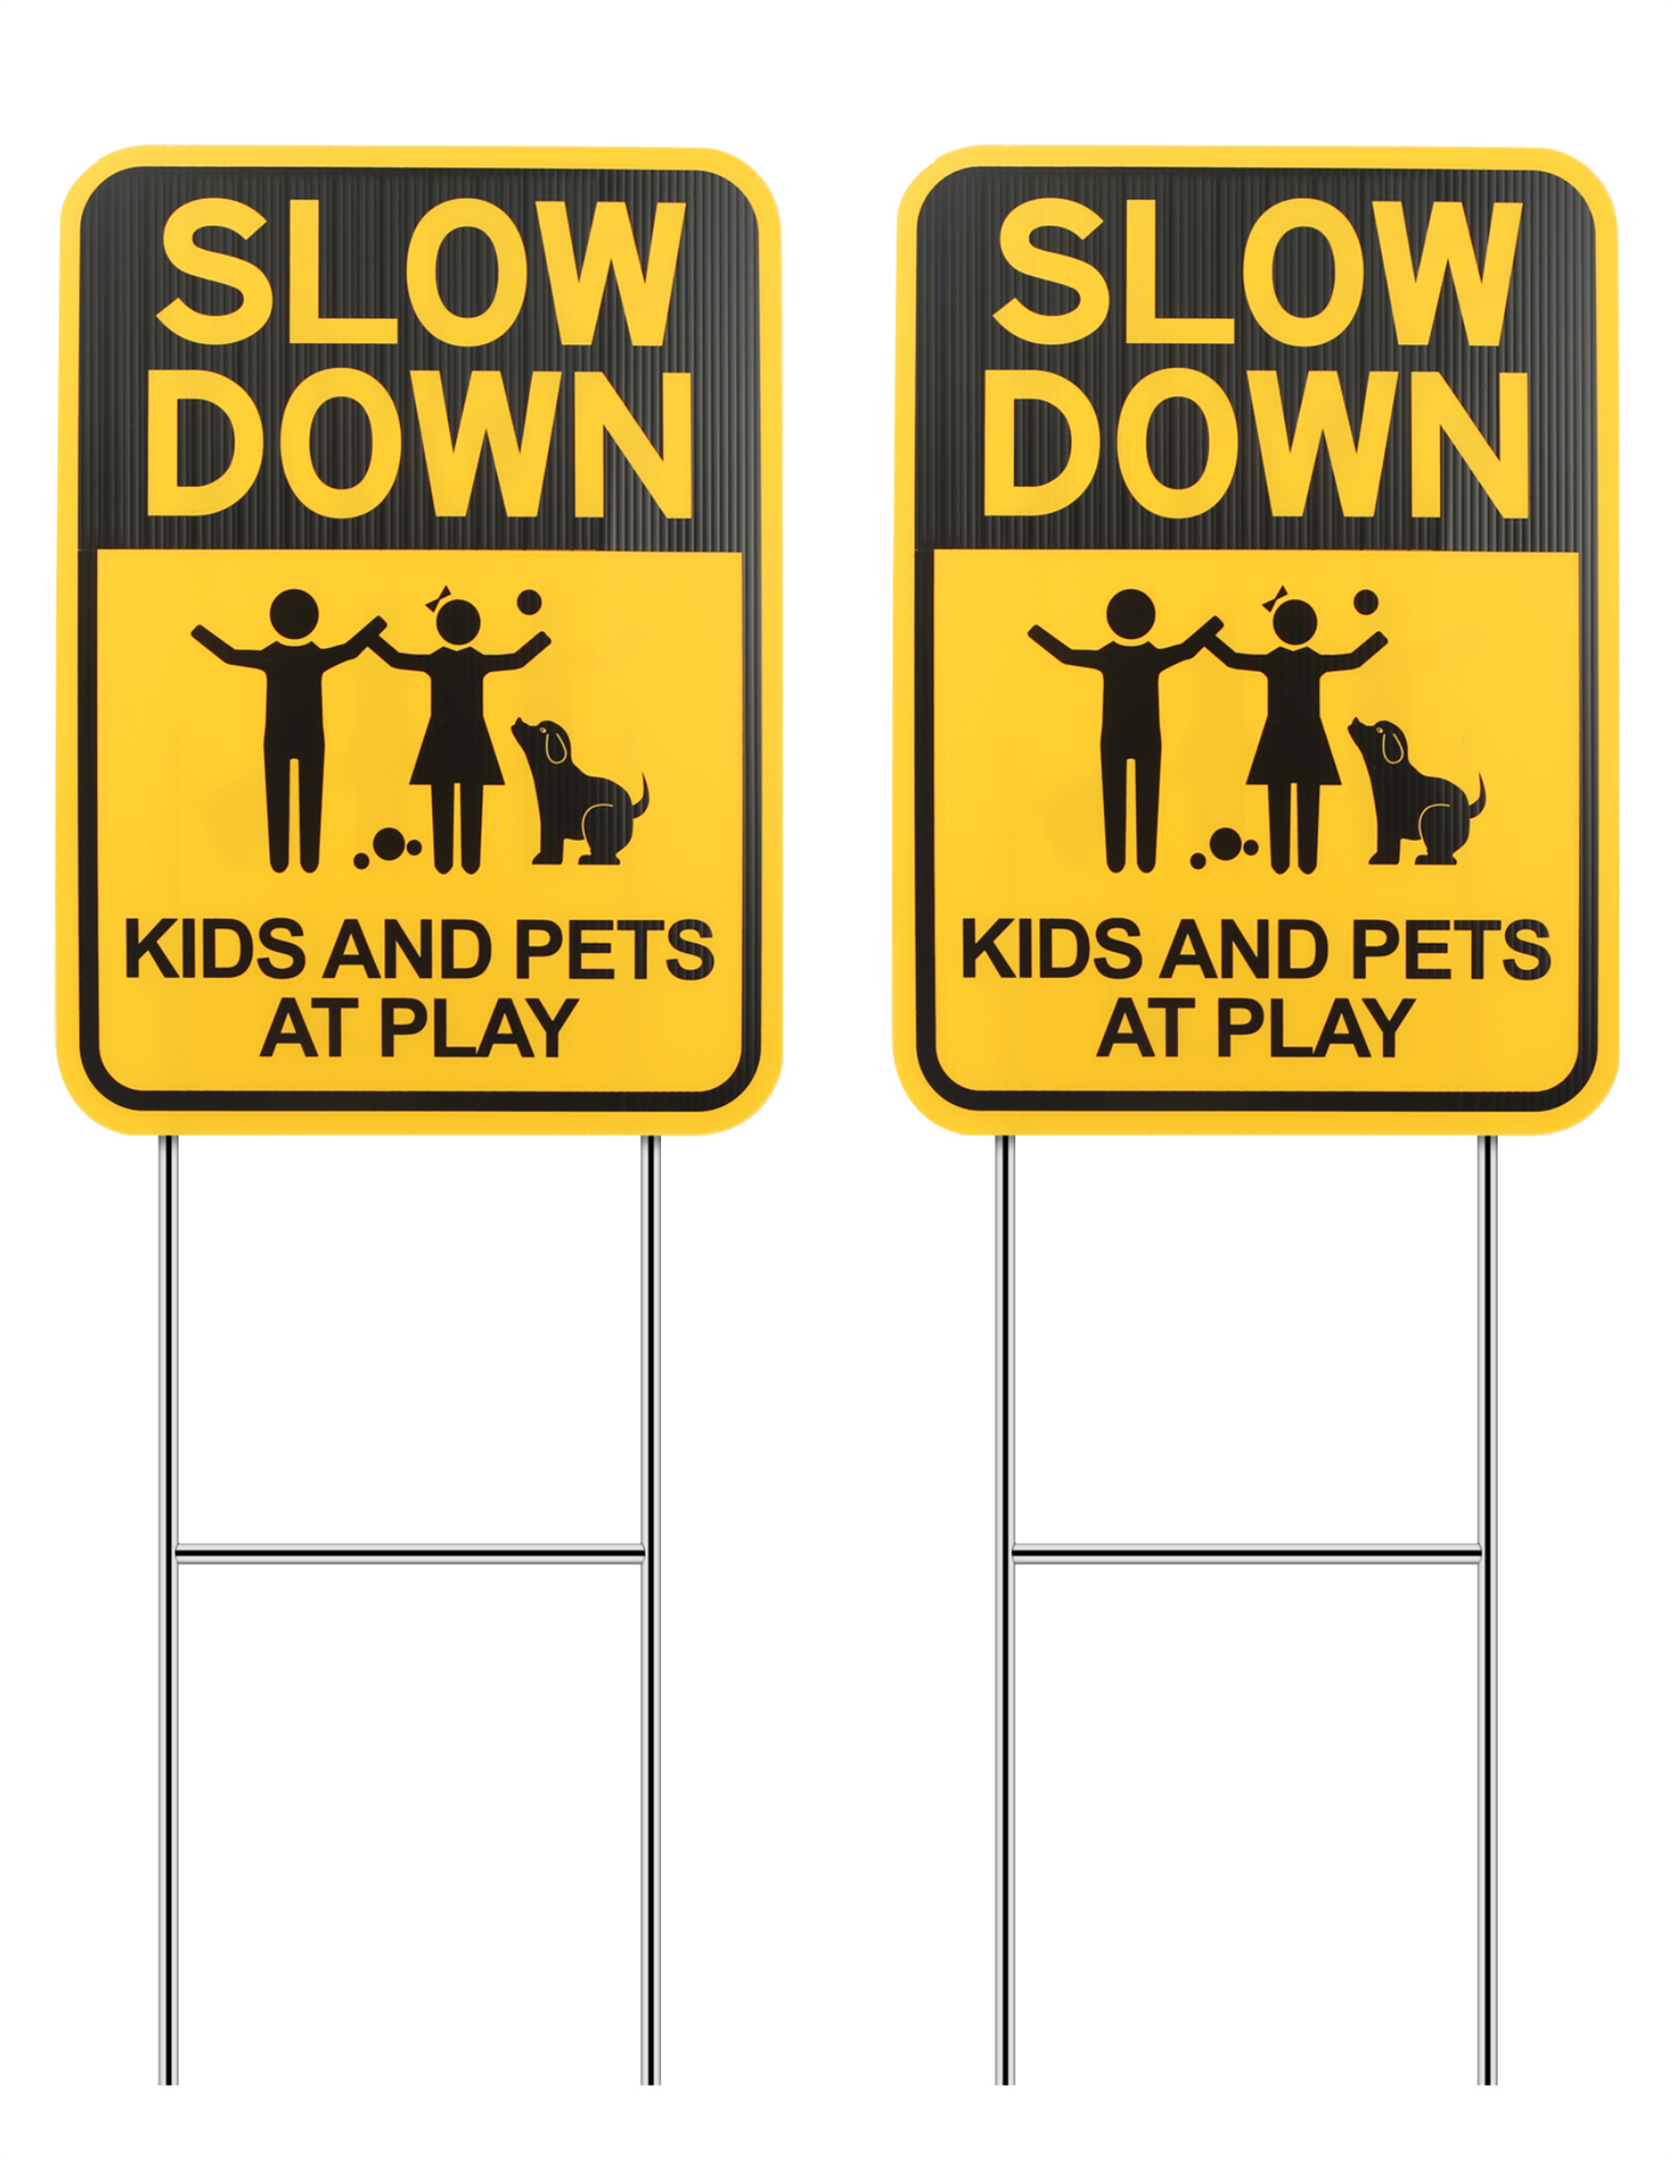 THTEN 16" x 12" Slow Down Kids and Pets at Play Yard Signs with Metal Wire H Stakes, Caution Road Sign, Road Sign Decor for Parents, Home Owners Associations, Realtors, Real Estate,Schools 2 Pack